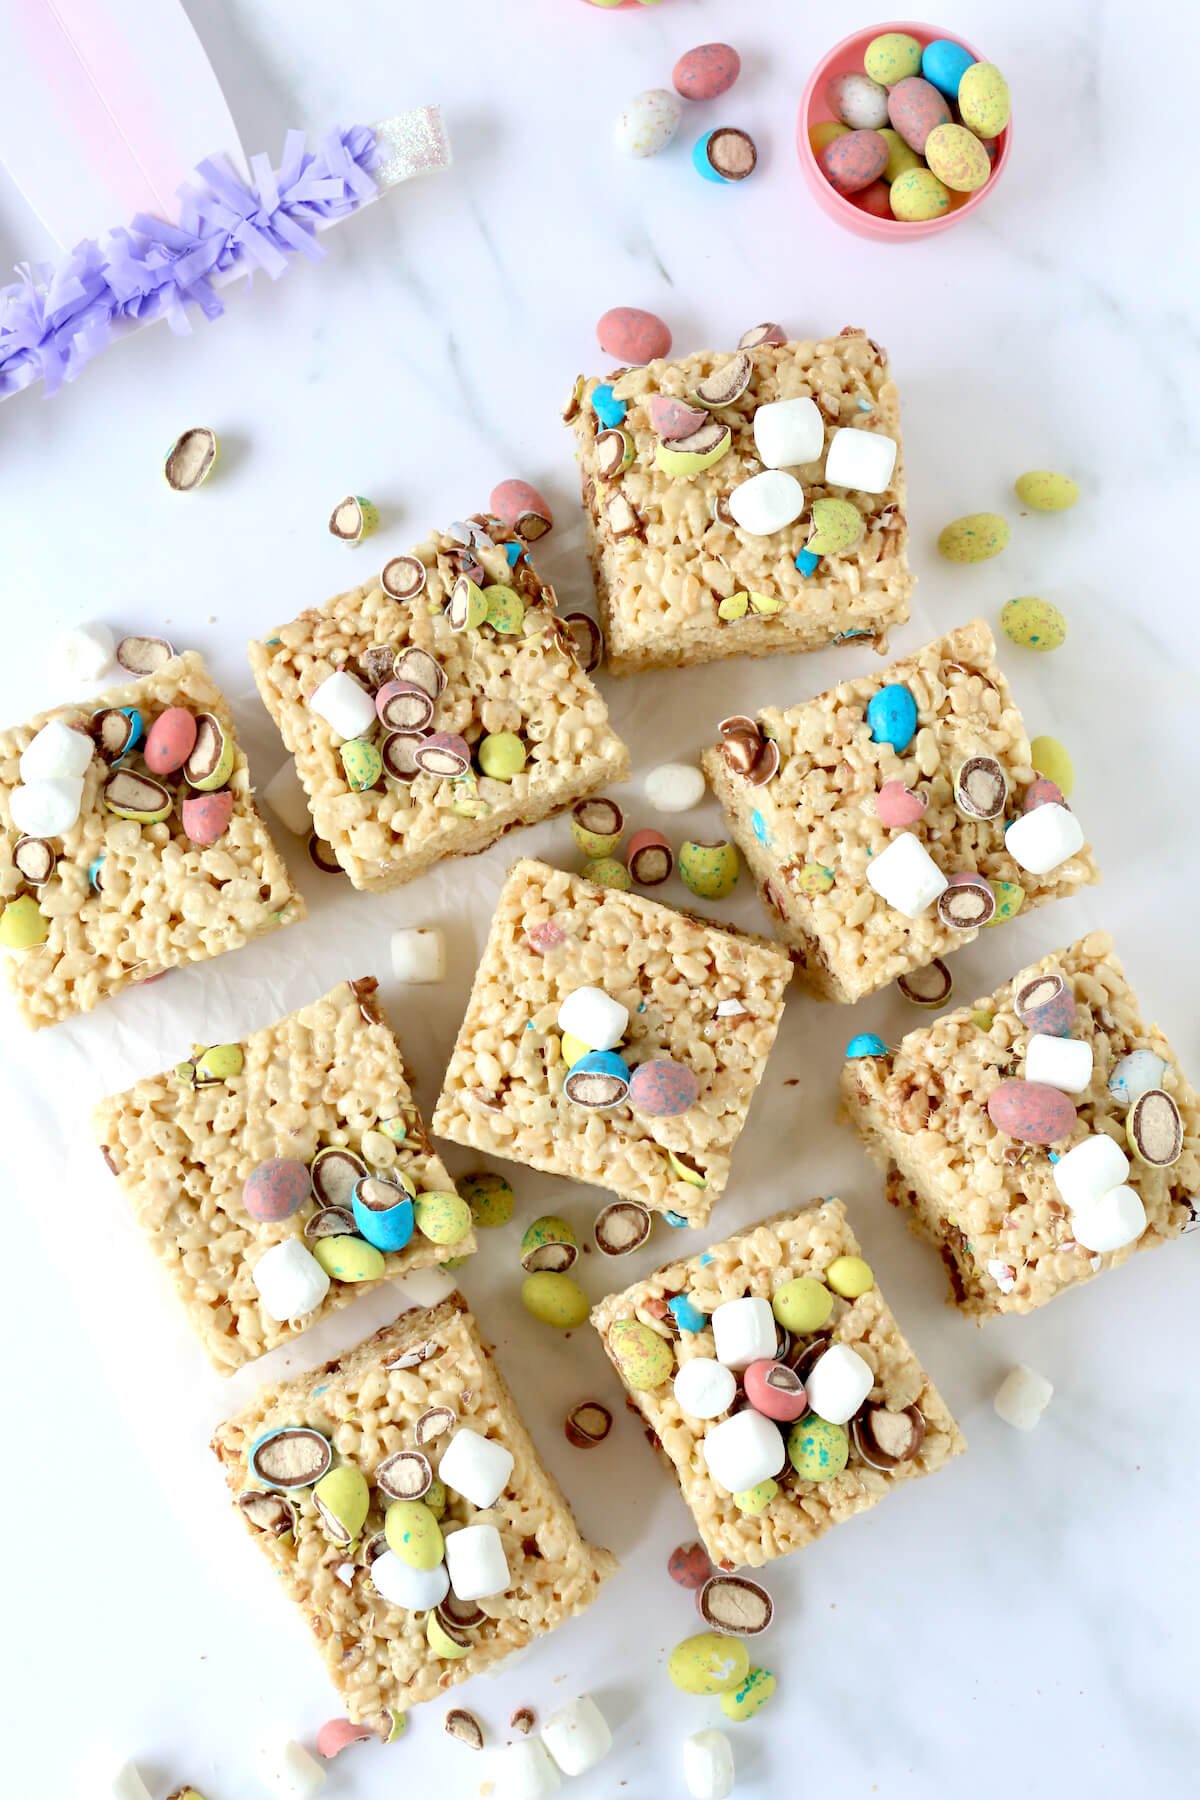 Nine square of rice krispie treats with malted eggs and marshmallows on top.  